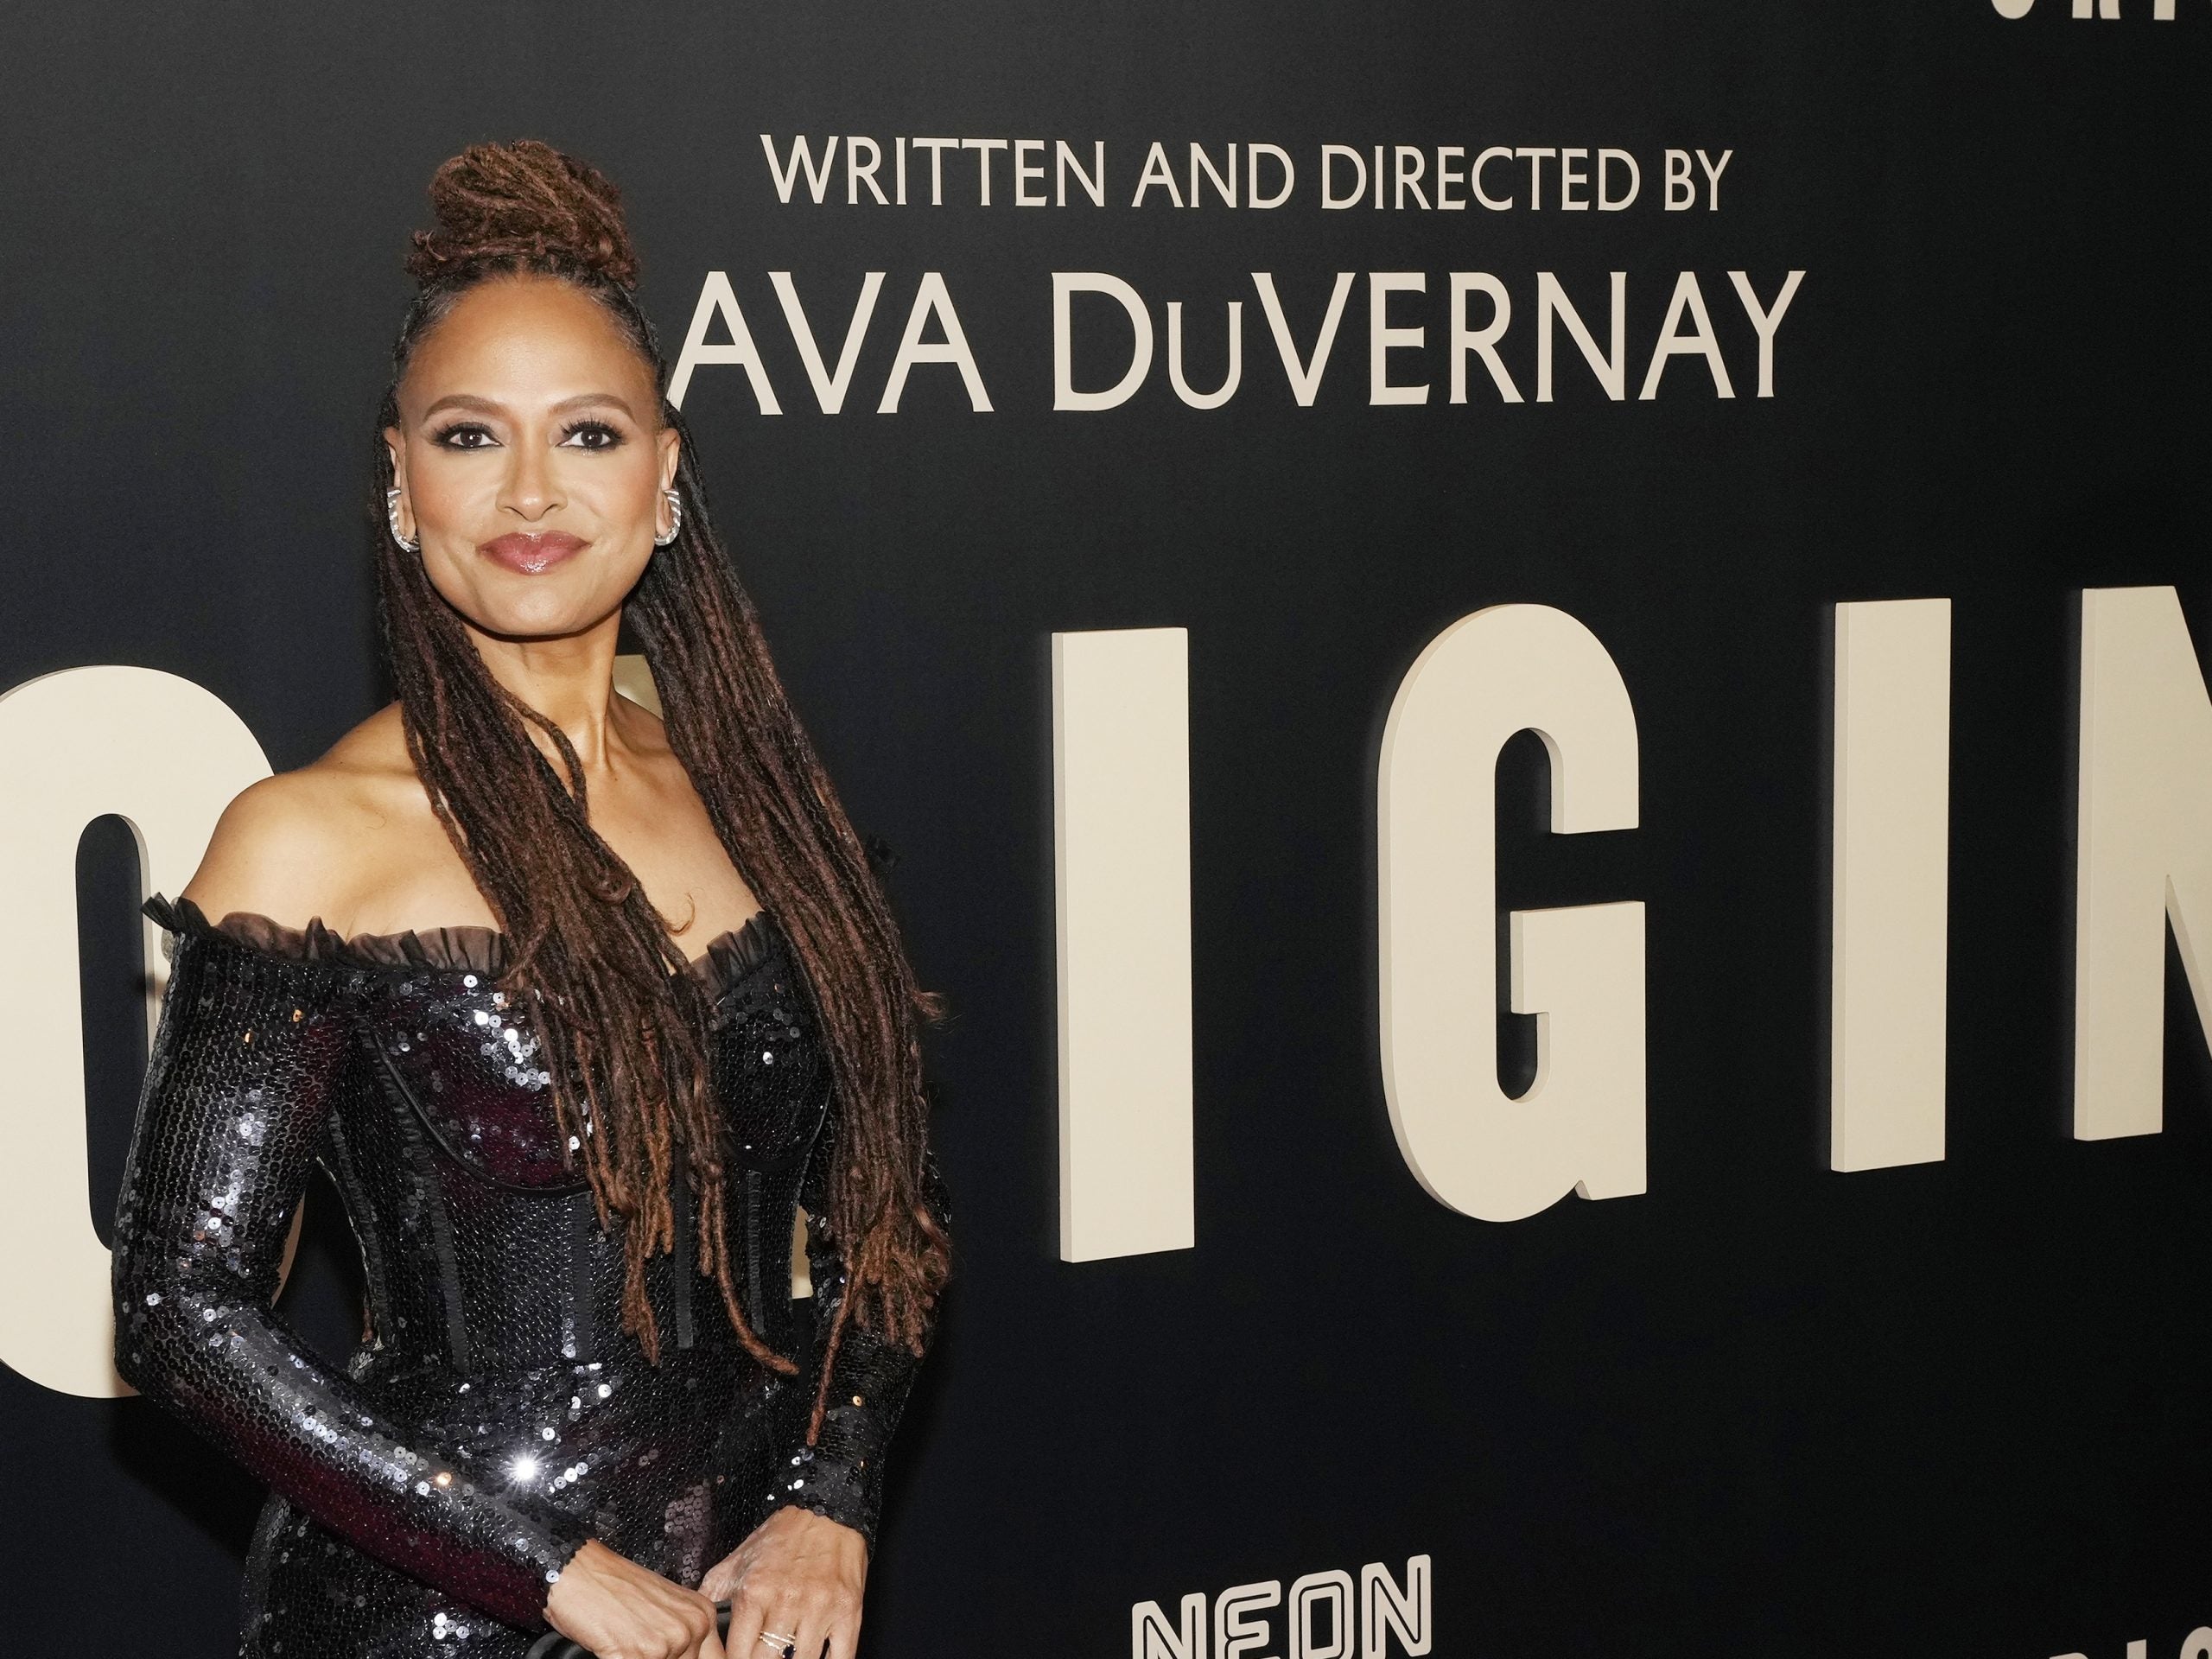 Ava DuVernay Questions Everything In New Film and Traces Back To Humanity’s ‘Origin’